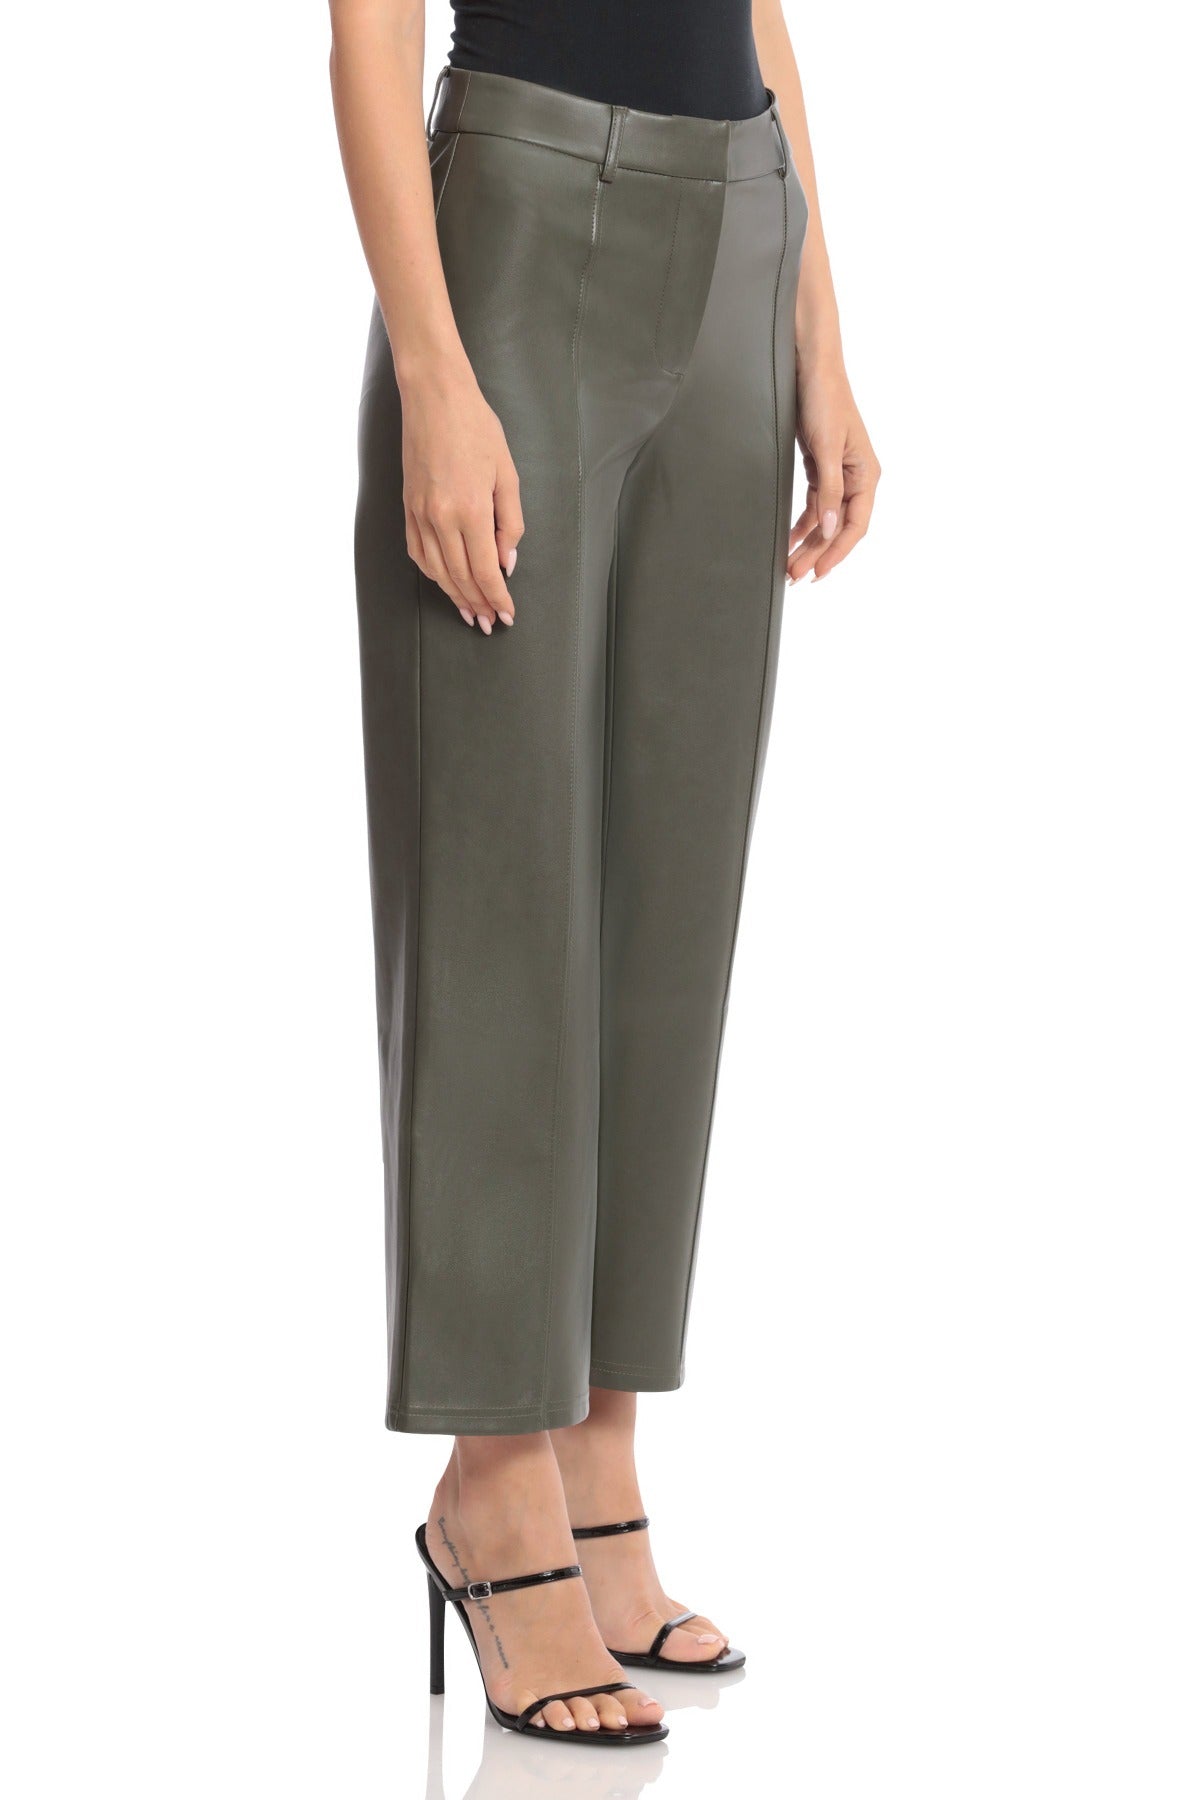 Faux Leather Seam-Front Straight Leg Trouser Pants Olive Green - Flattering Office to Date Night Bottoms for Women Designer Fashion Pant